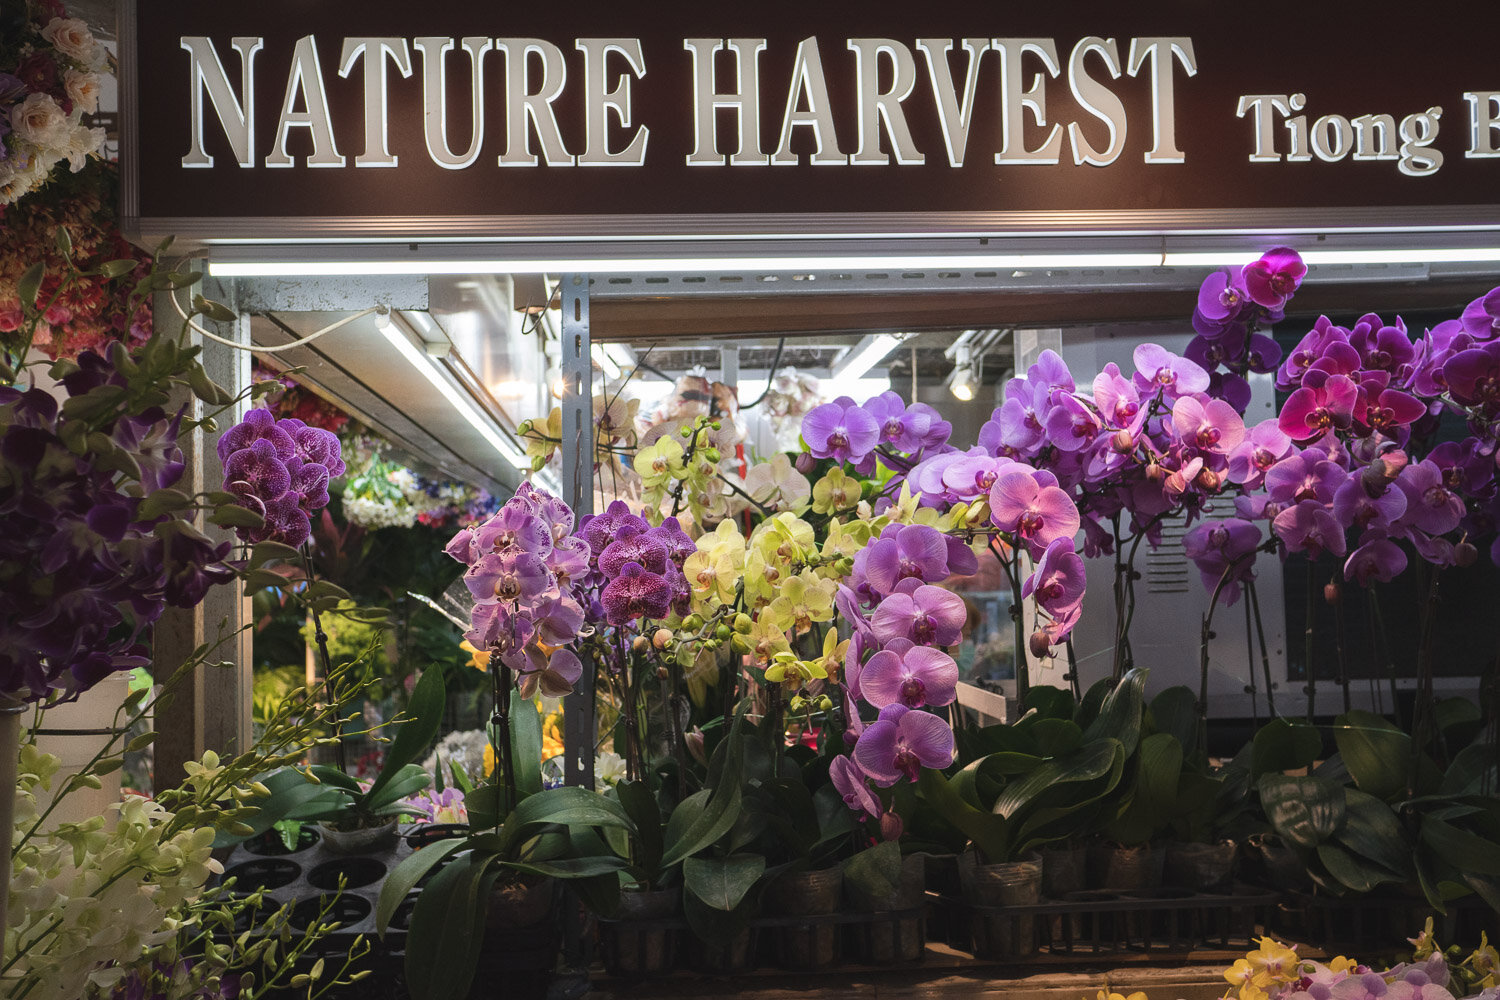 At Nature Harvest in Tiong Bahru Market you can find lush, beautiful flowers at a good price.